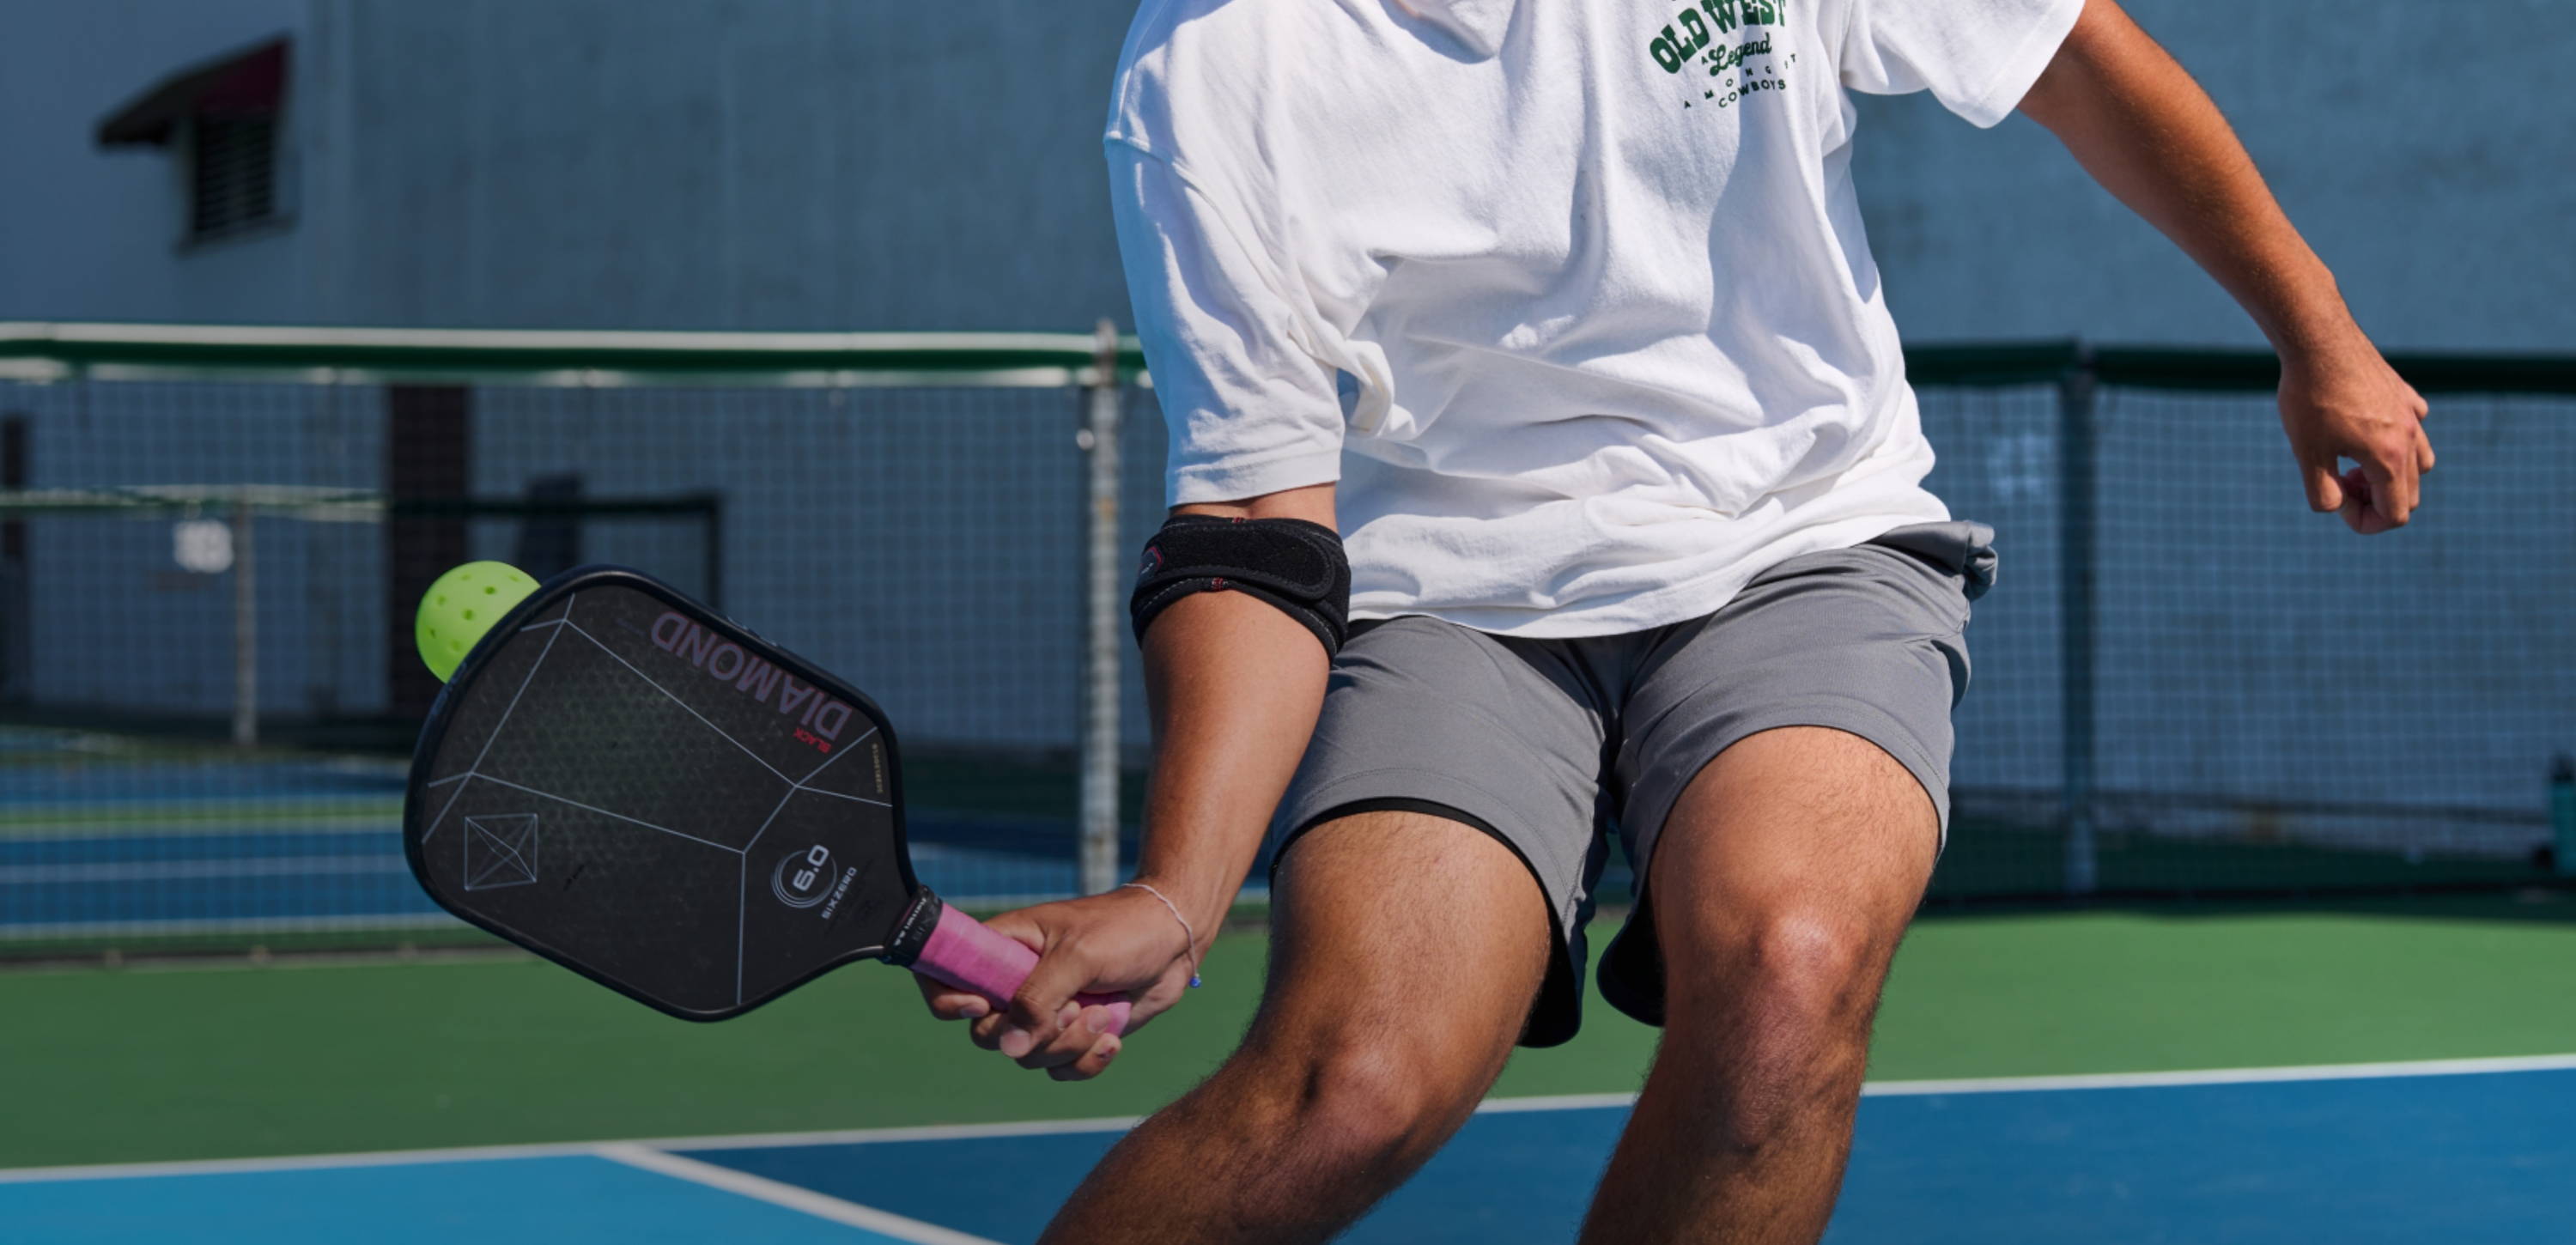 Pickleball Athlete Wearing McDavid Elbow Strap With Pads